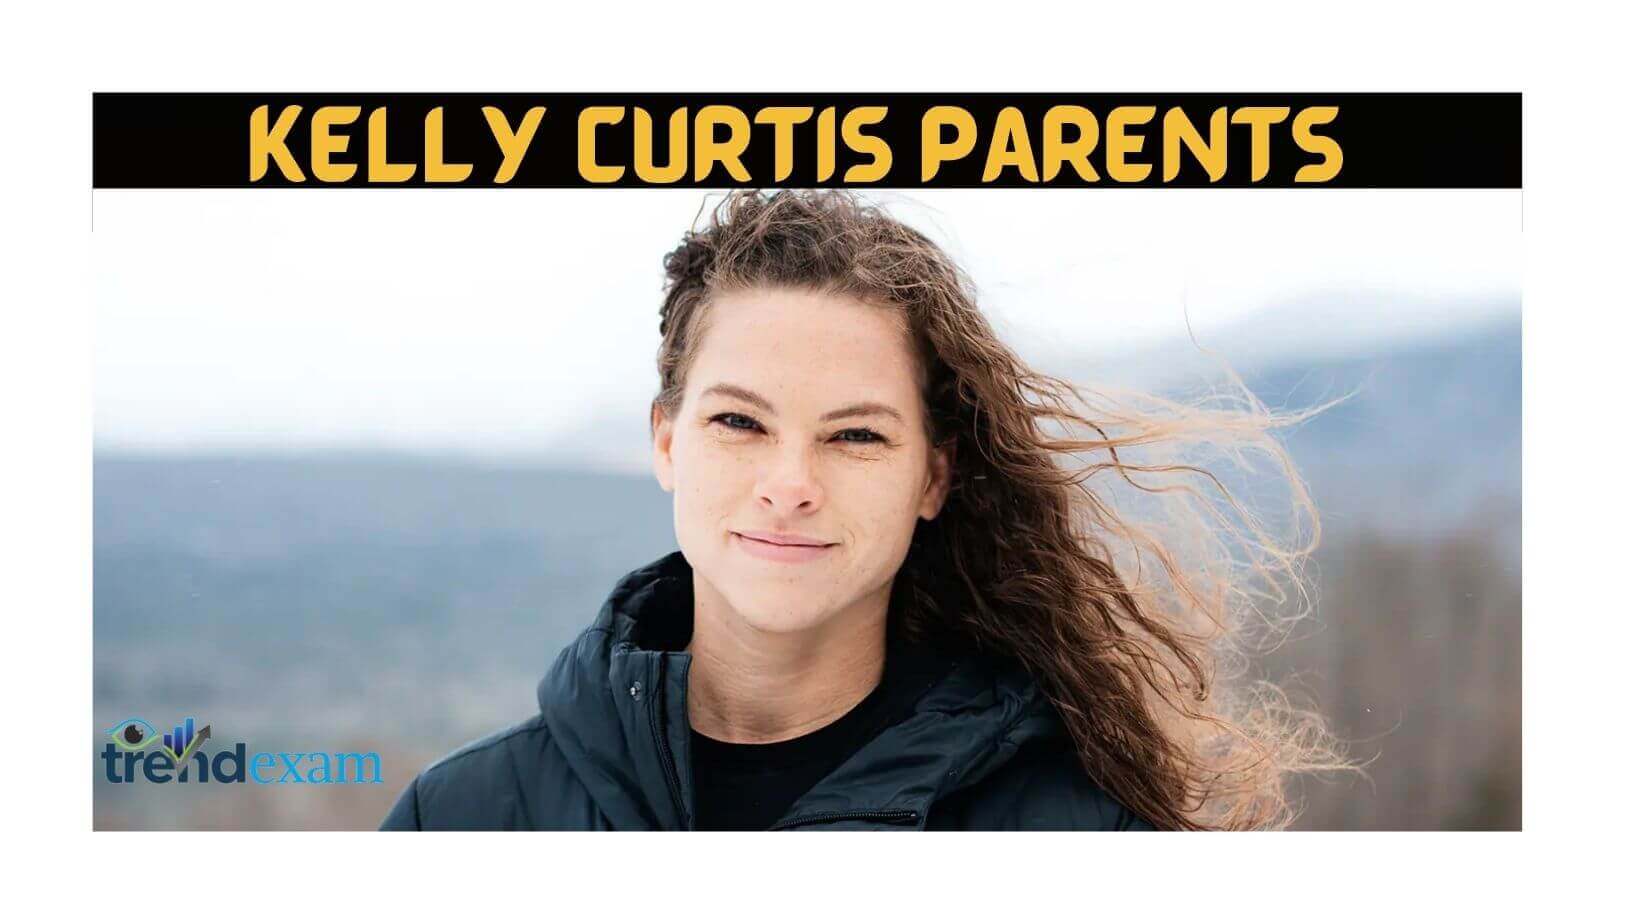 Kelly Curtis Parents